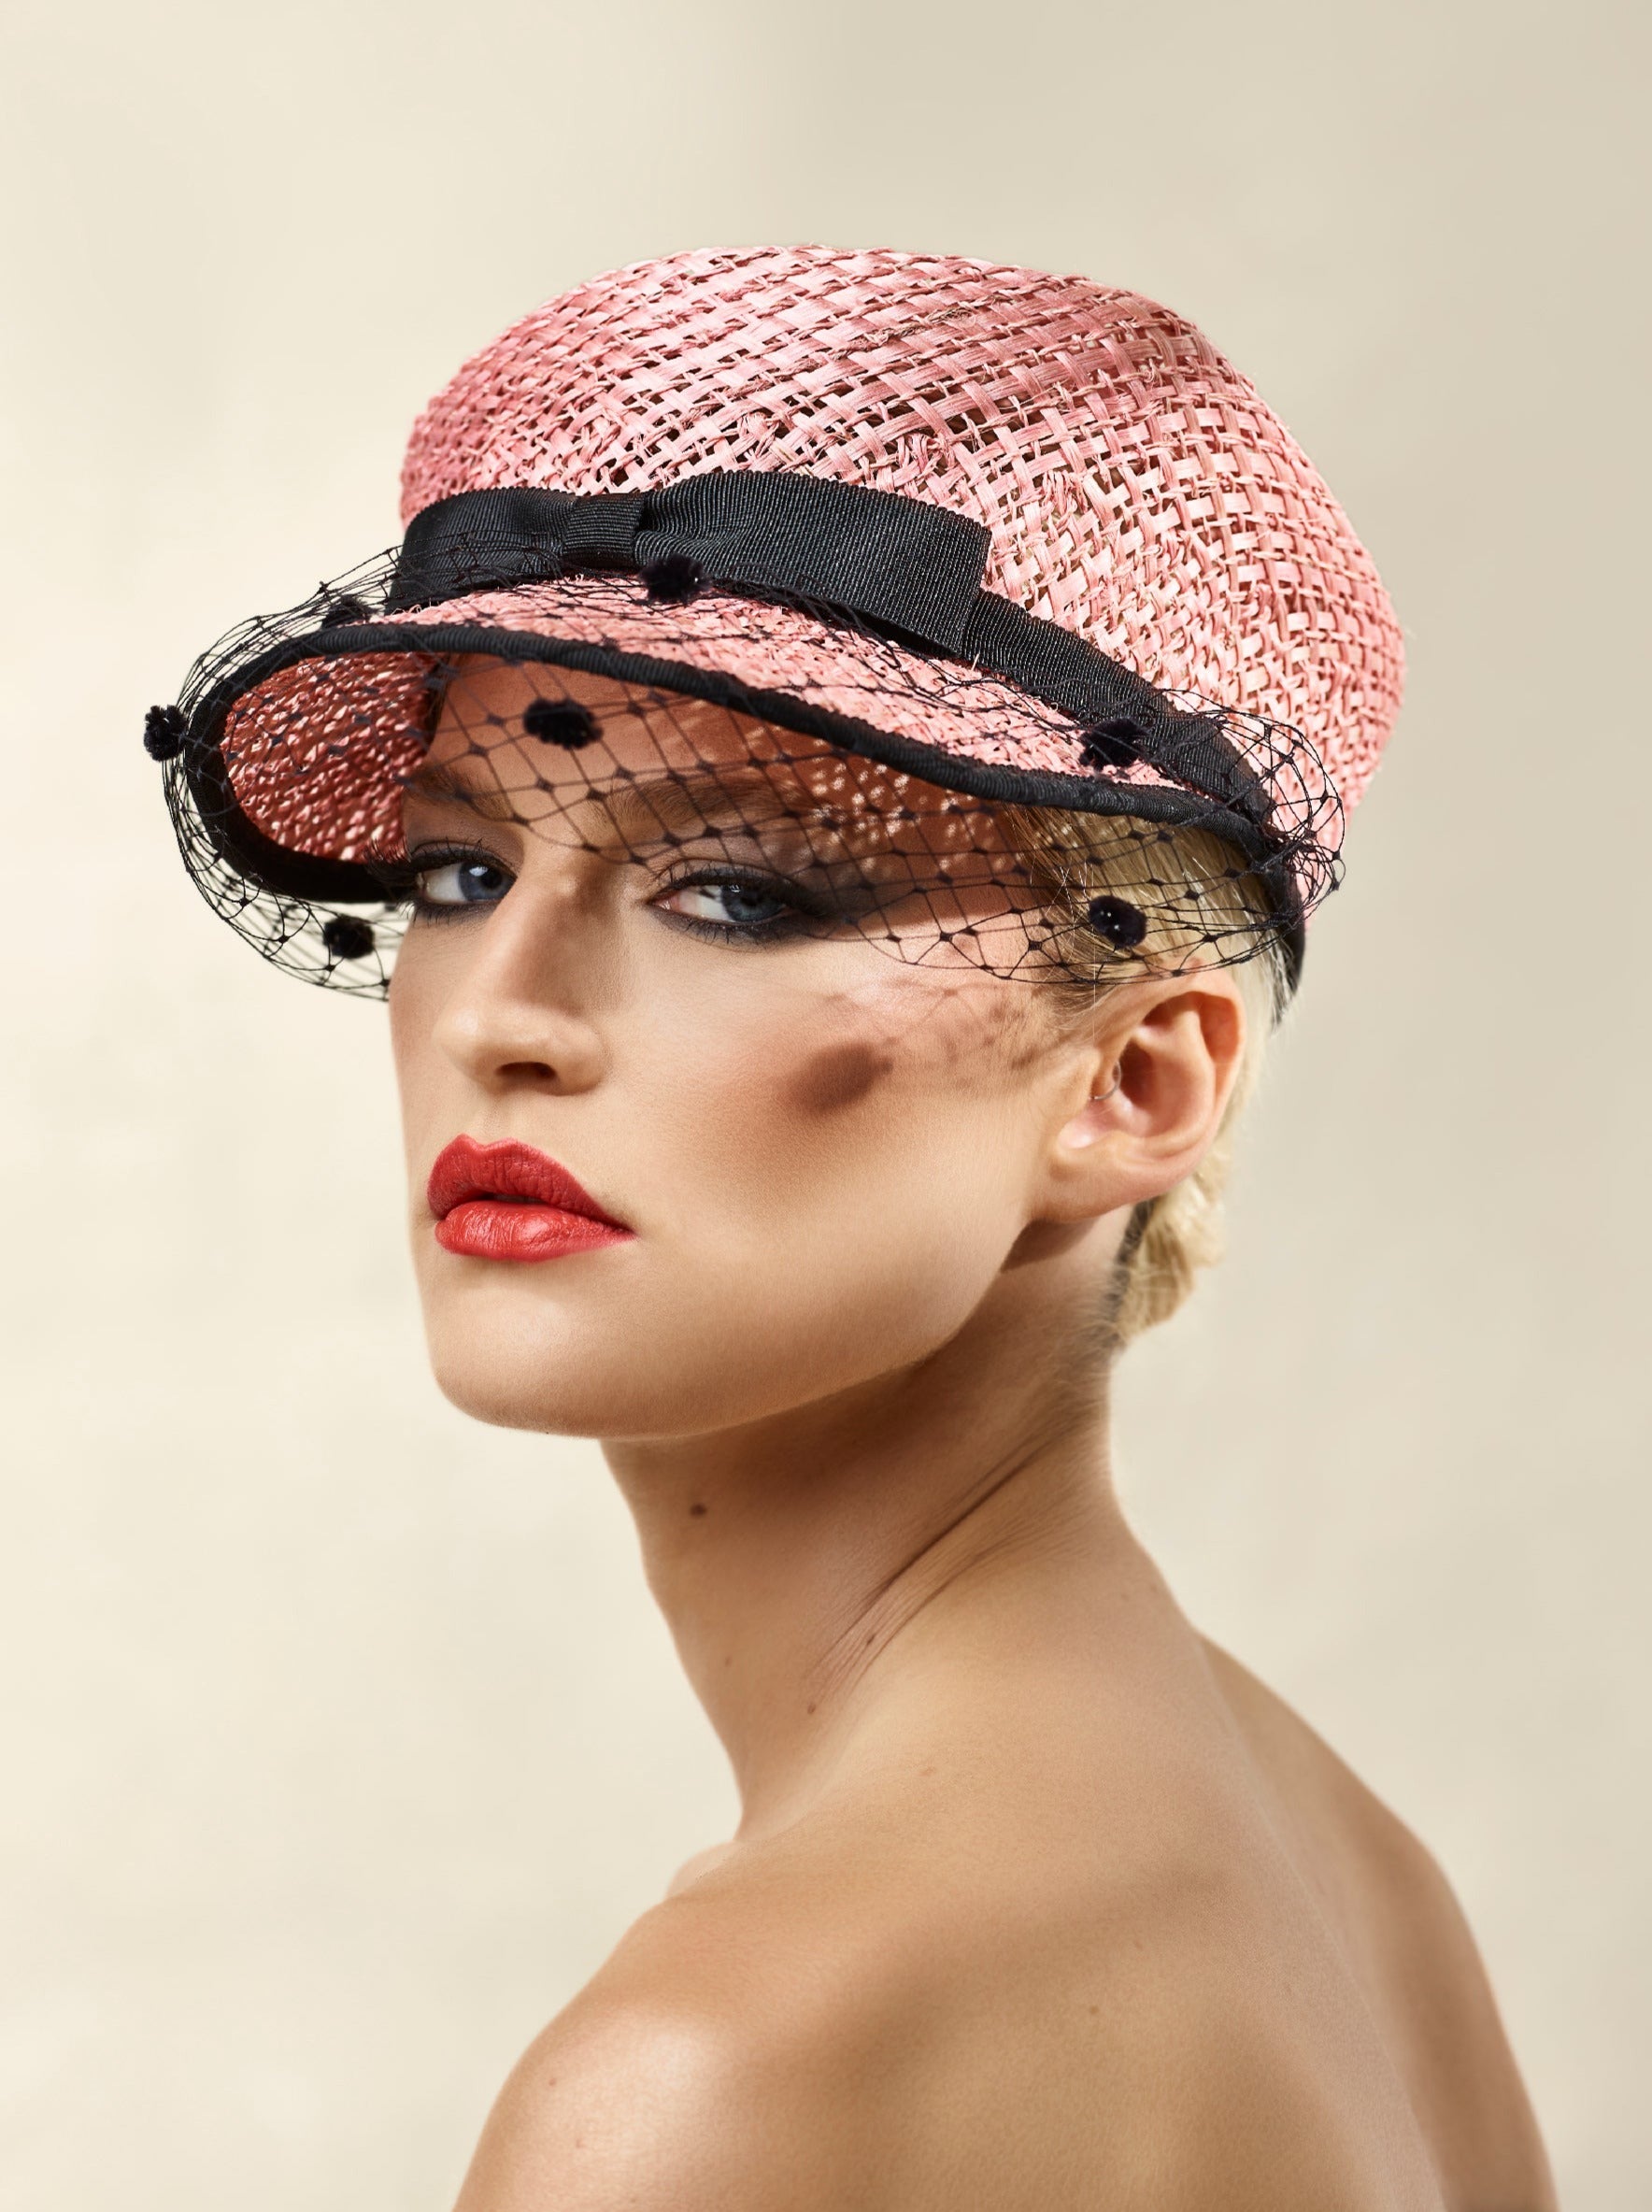 Misa Harada Hats| ANAIS | Asymmetric cap in pink ramie and jute mix, with black dotted veiled peak and grosgrain bow